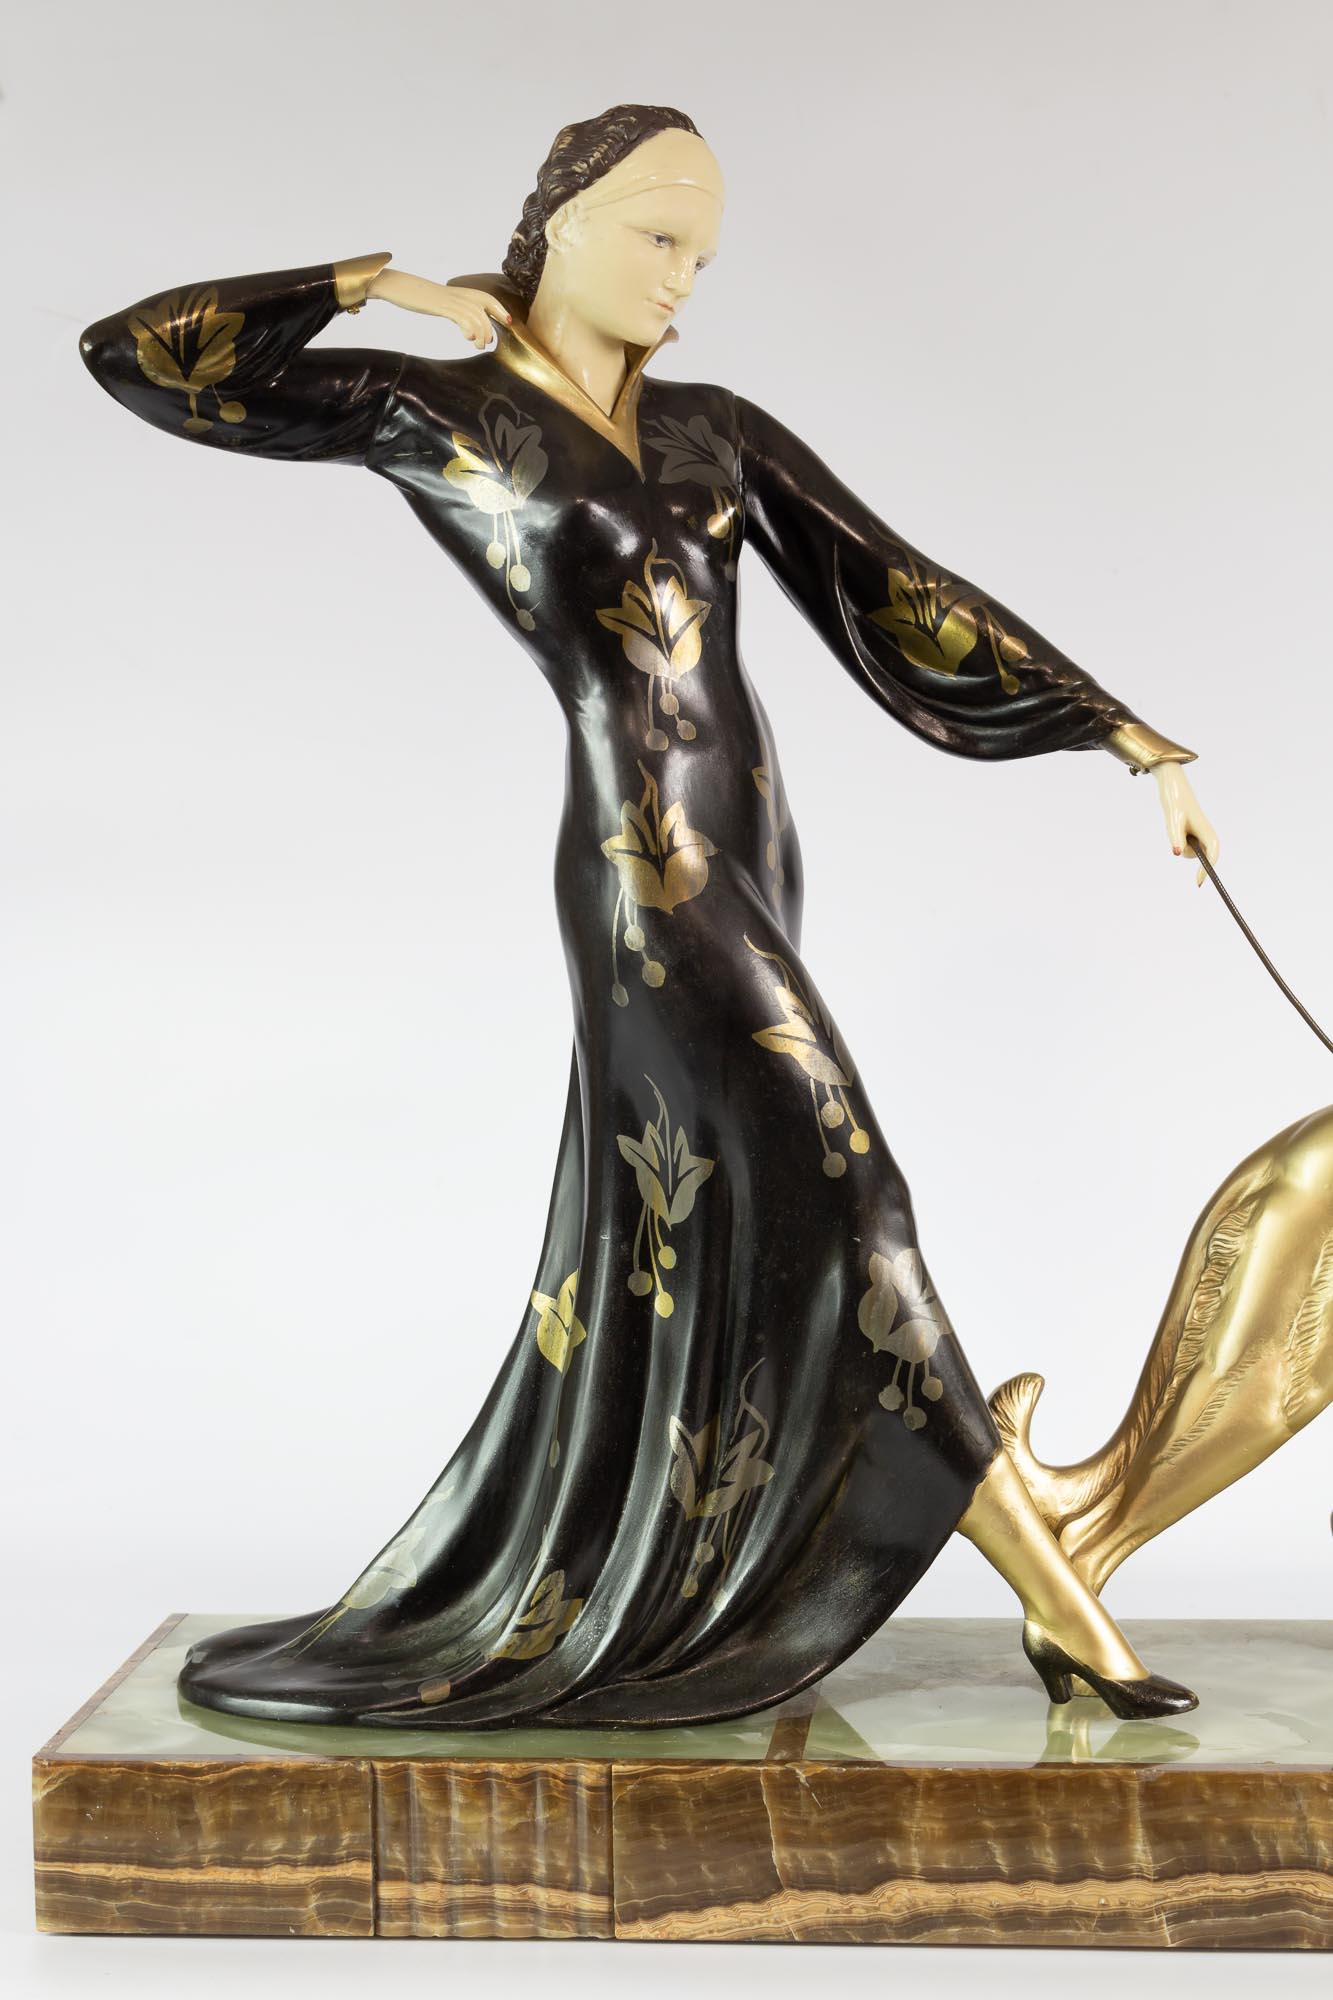 French Art deco sculpture by Menneville and Rochard